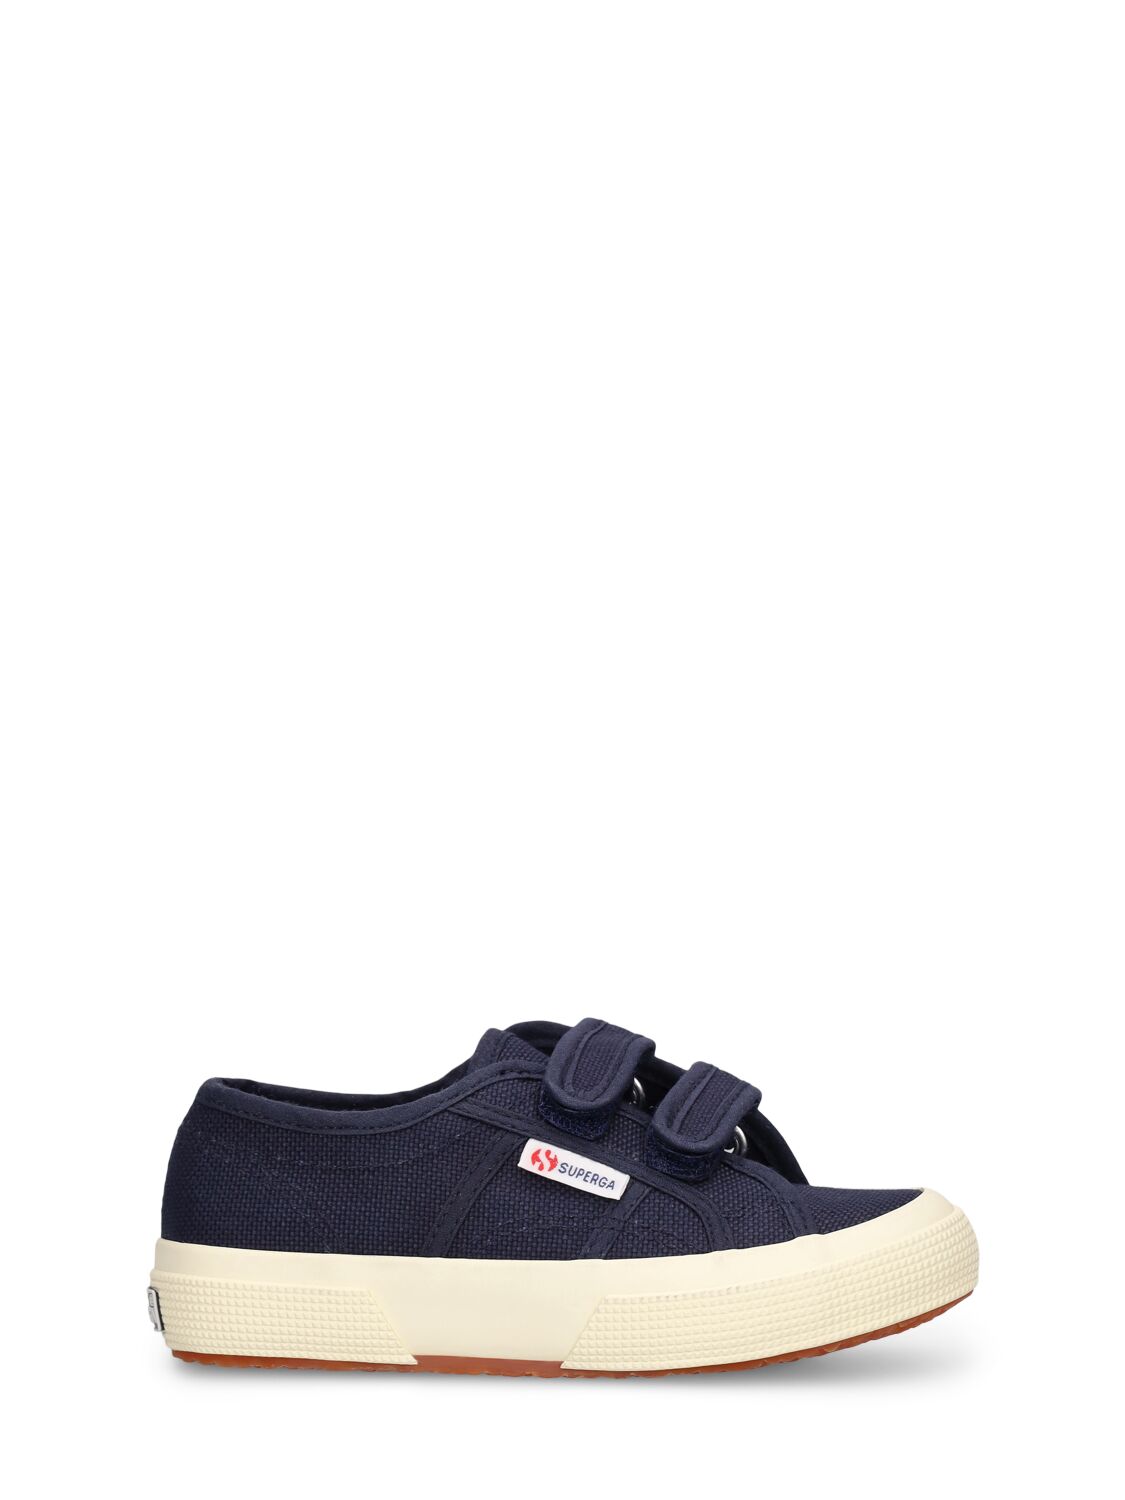 Superga Kids' 2750-cotjstrap Classic Canvas Sneakers In 네이비